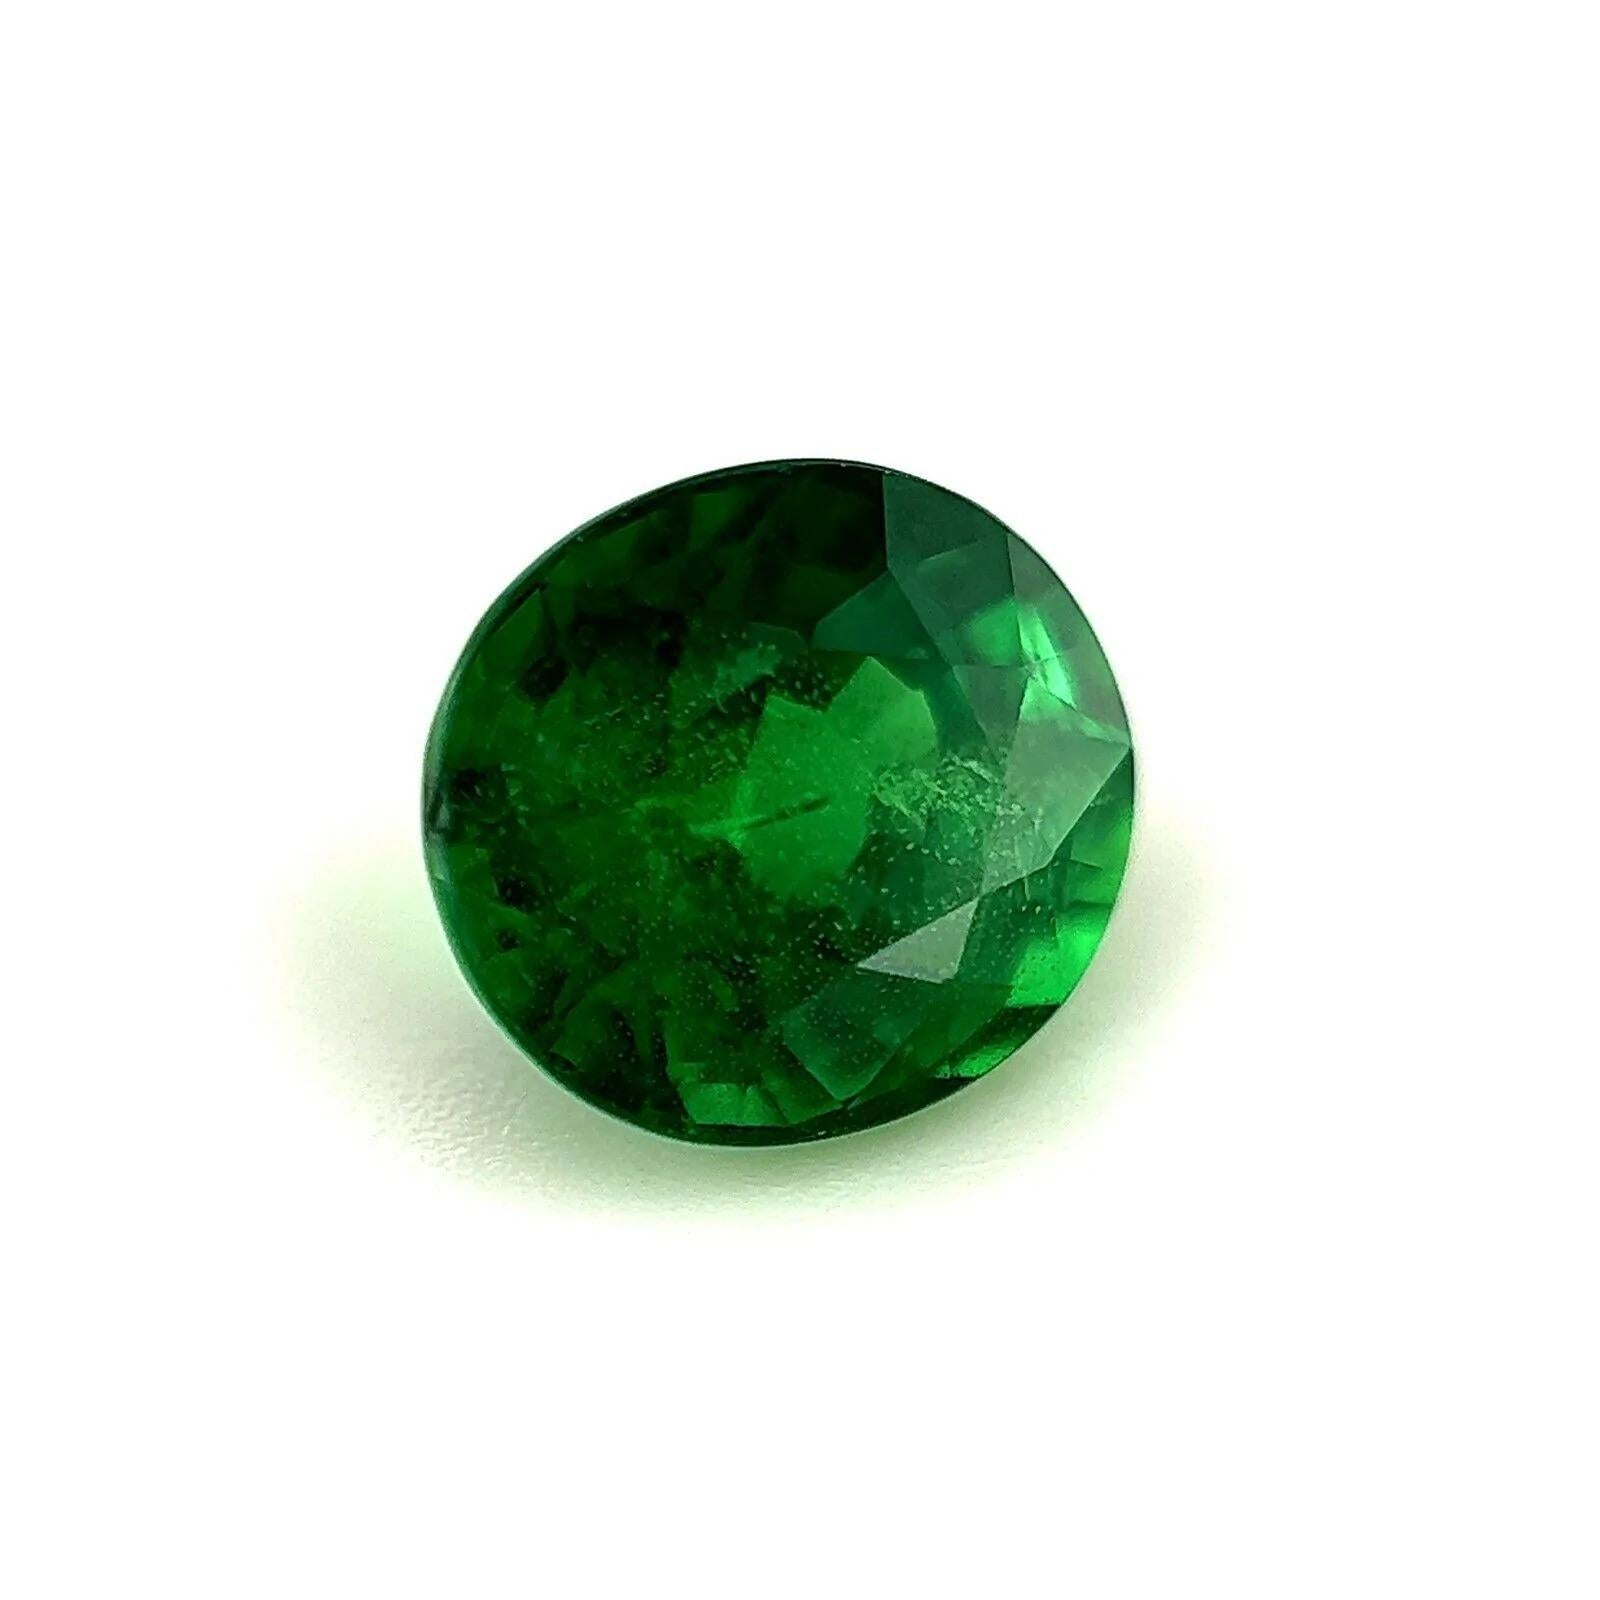 Tsavorite Garnet 2.02ct Fine Colour Vivid Green Oval Cut Gem 7.3x6.5mm

Fine Vivid Green Tsavorite Garnet.
2.02 Carat stone with a beautiful vivid green colour and good clarity. Some small natural Inclusions visible when looking closely, no breaks